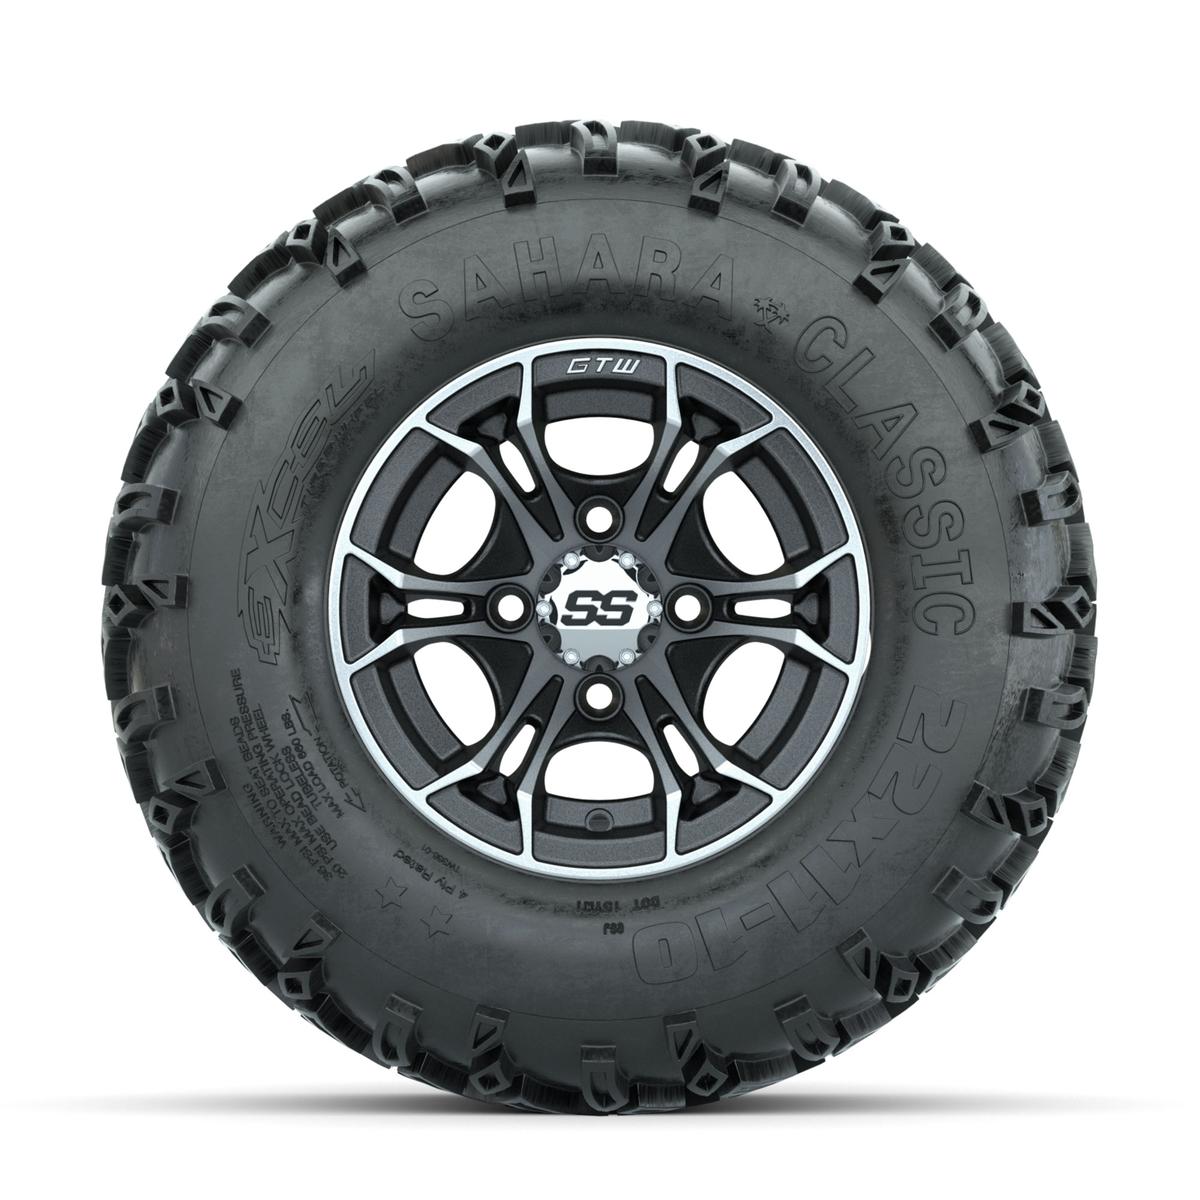 GTW Spyder Machined/Matte Grey 10 in Wheels with 22x11-10 Sahara Classic All Terrain Tires – Full Set